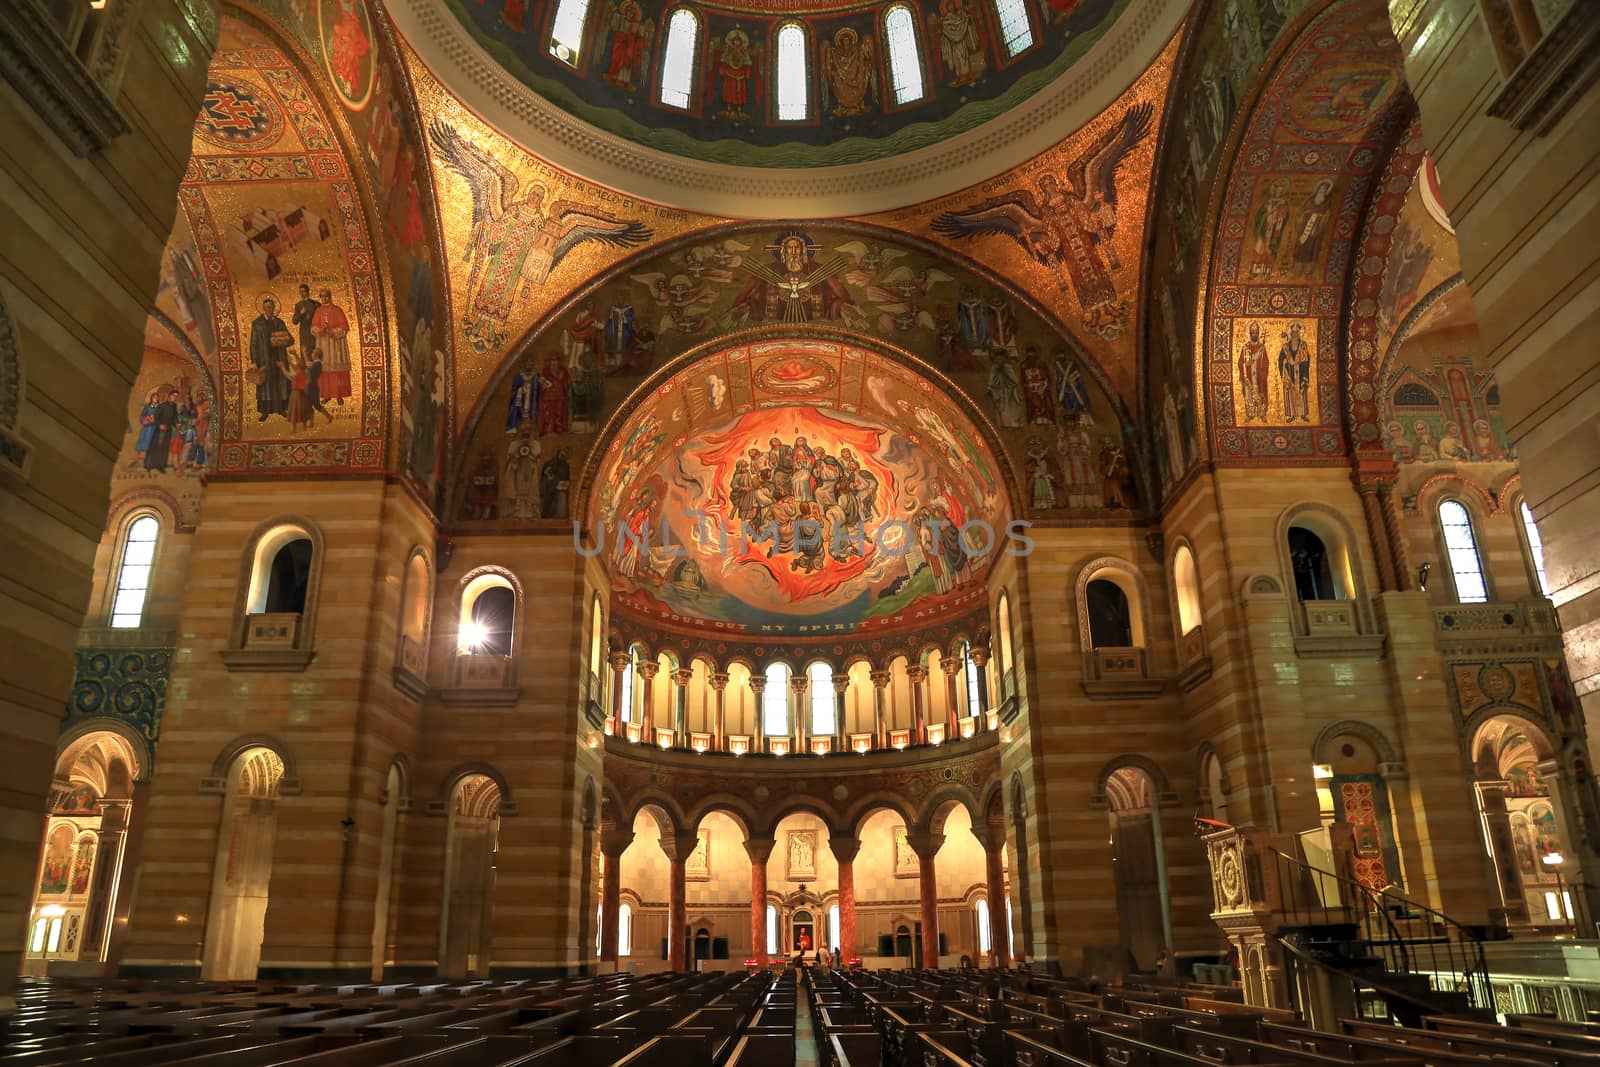 St. Louis, Missouri, USA - August 18, 2017: Sanctuary of the Cathedral Basilica of Saint Louis on Lindell Boulevard in St. Louis, Missouri.